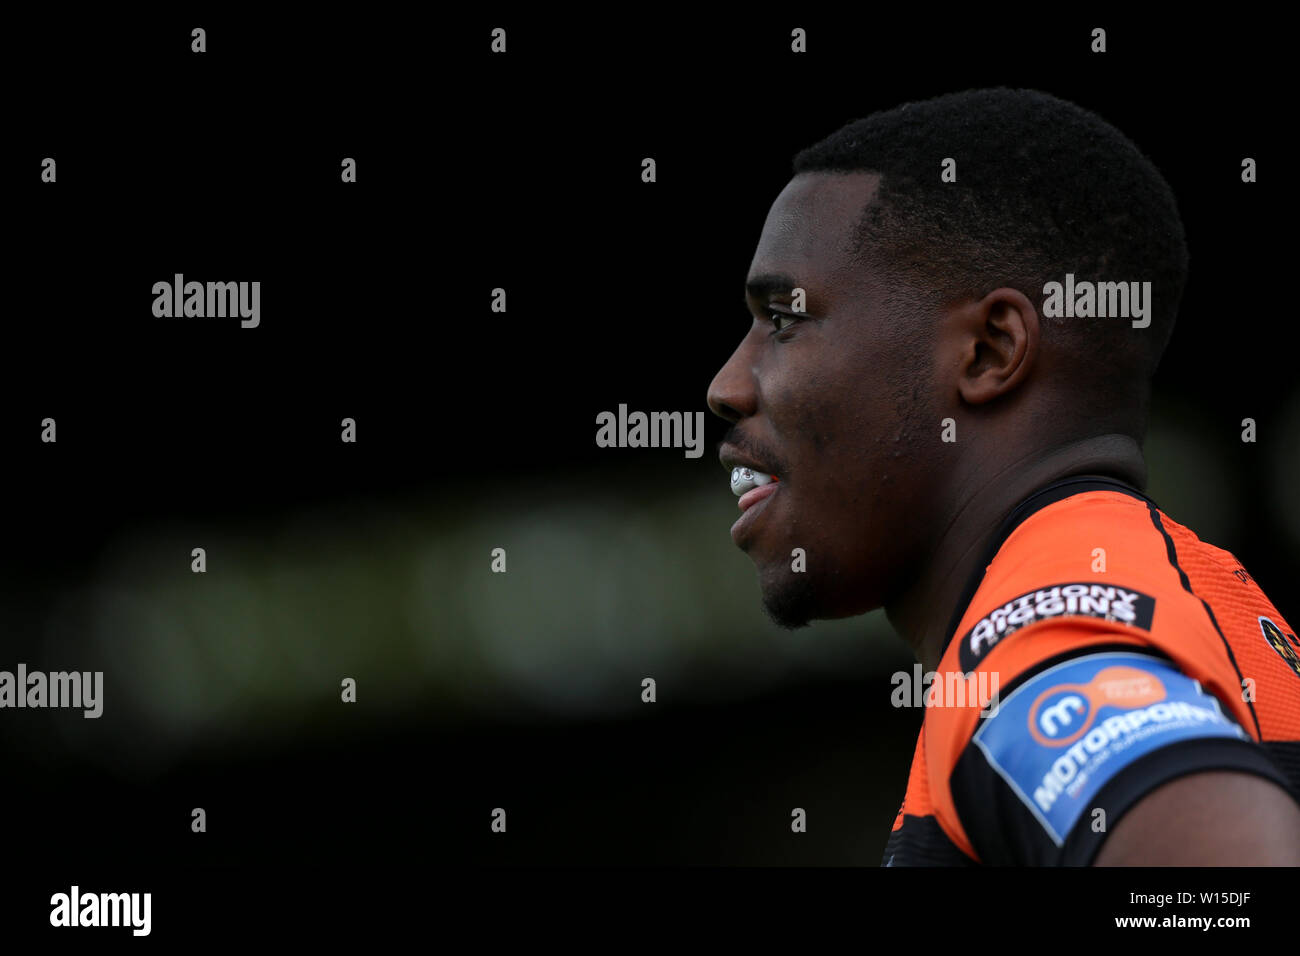 Castleford Tigers' Tuoyo Egodo during the Betfred Super League match at the Mend-A-Hose Jungle, Castleford. Stock Photo